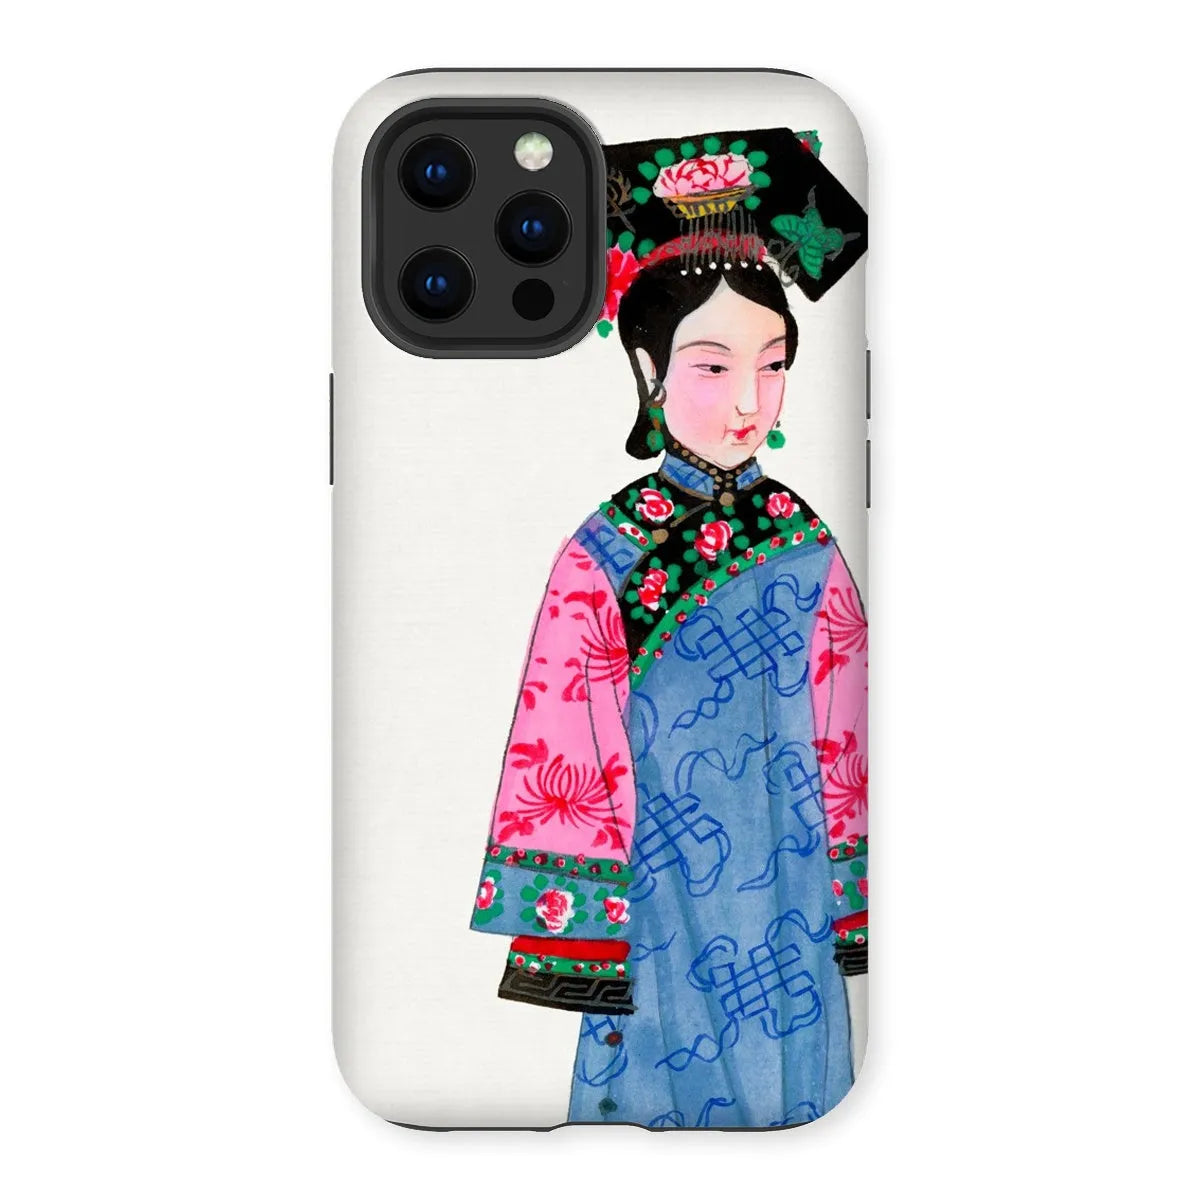 Noblewoman Too - Manchu Aesthetic Art Phone Case - Iphone 12 Pro Max / Matte - Mobile Phone Cases - Aesthetic Art